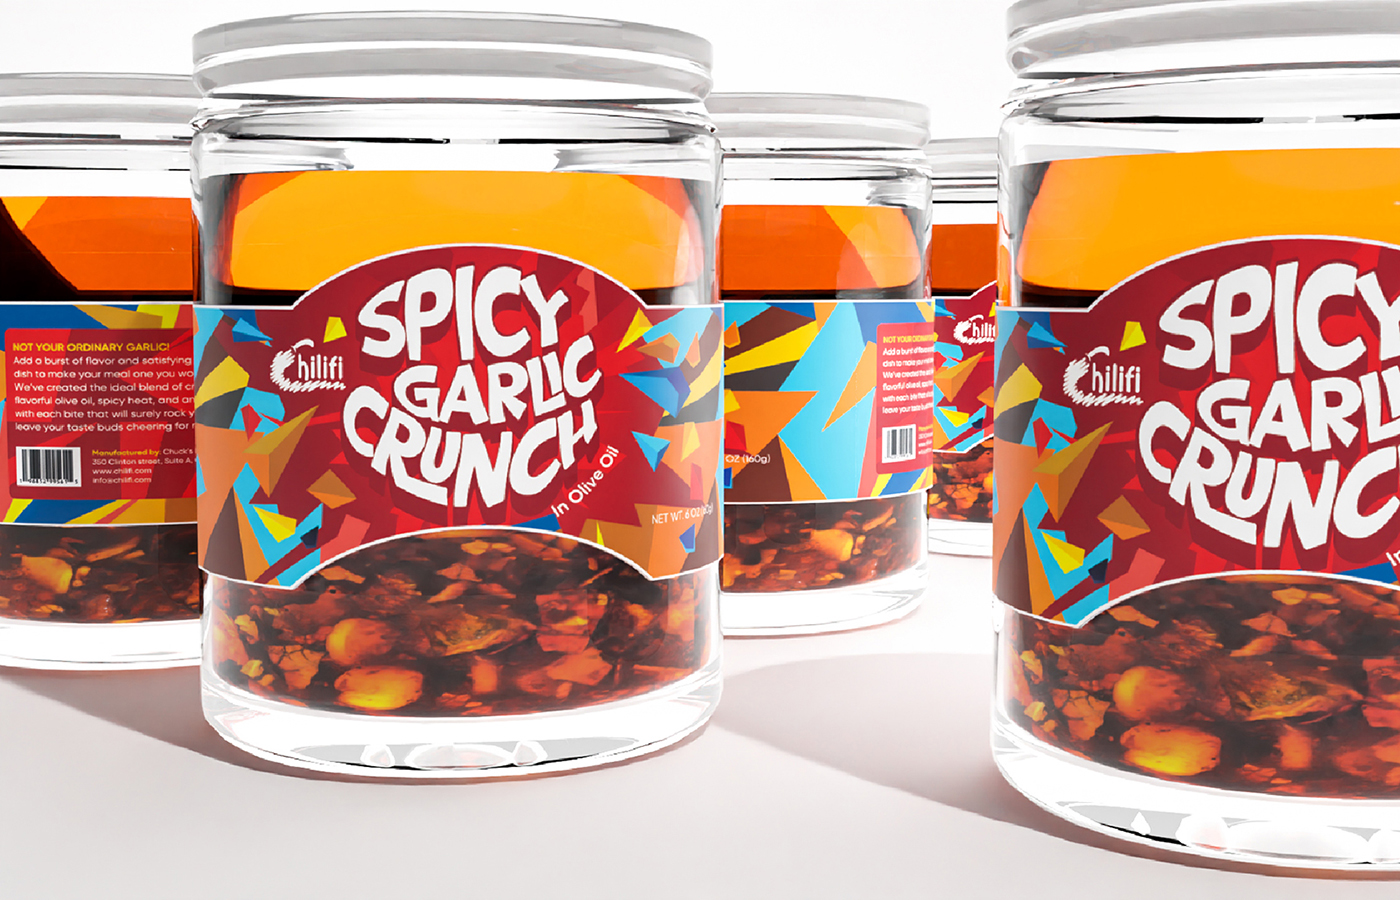 Chilifi Spicy Garlic Crunch – A Packaging That Reflects Its Origins